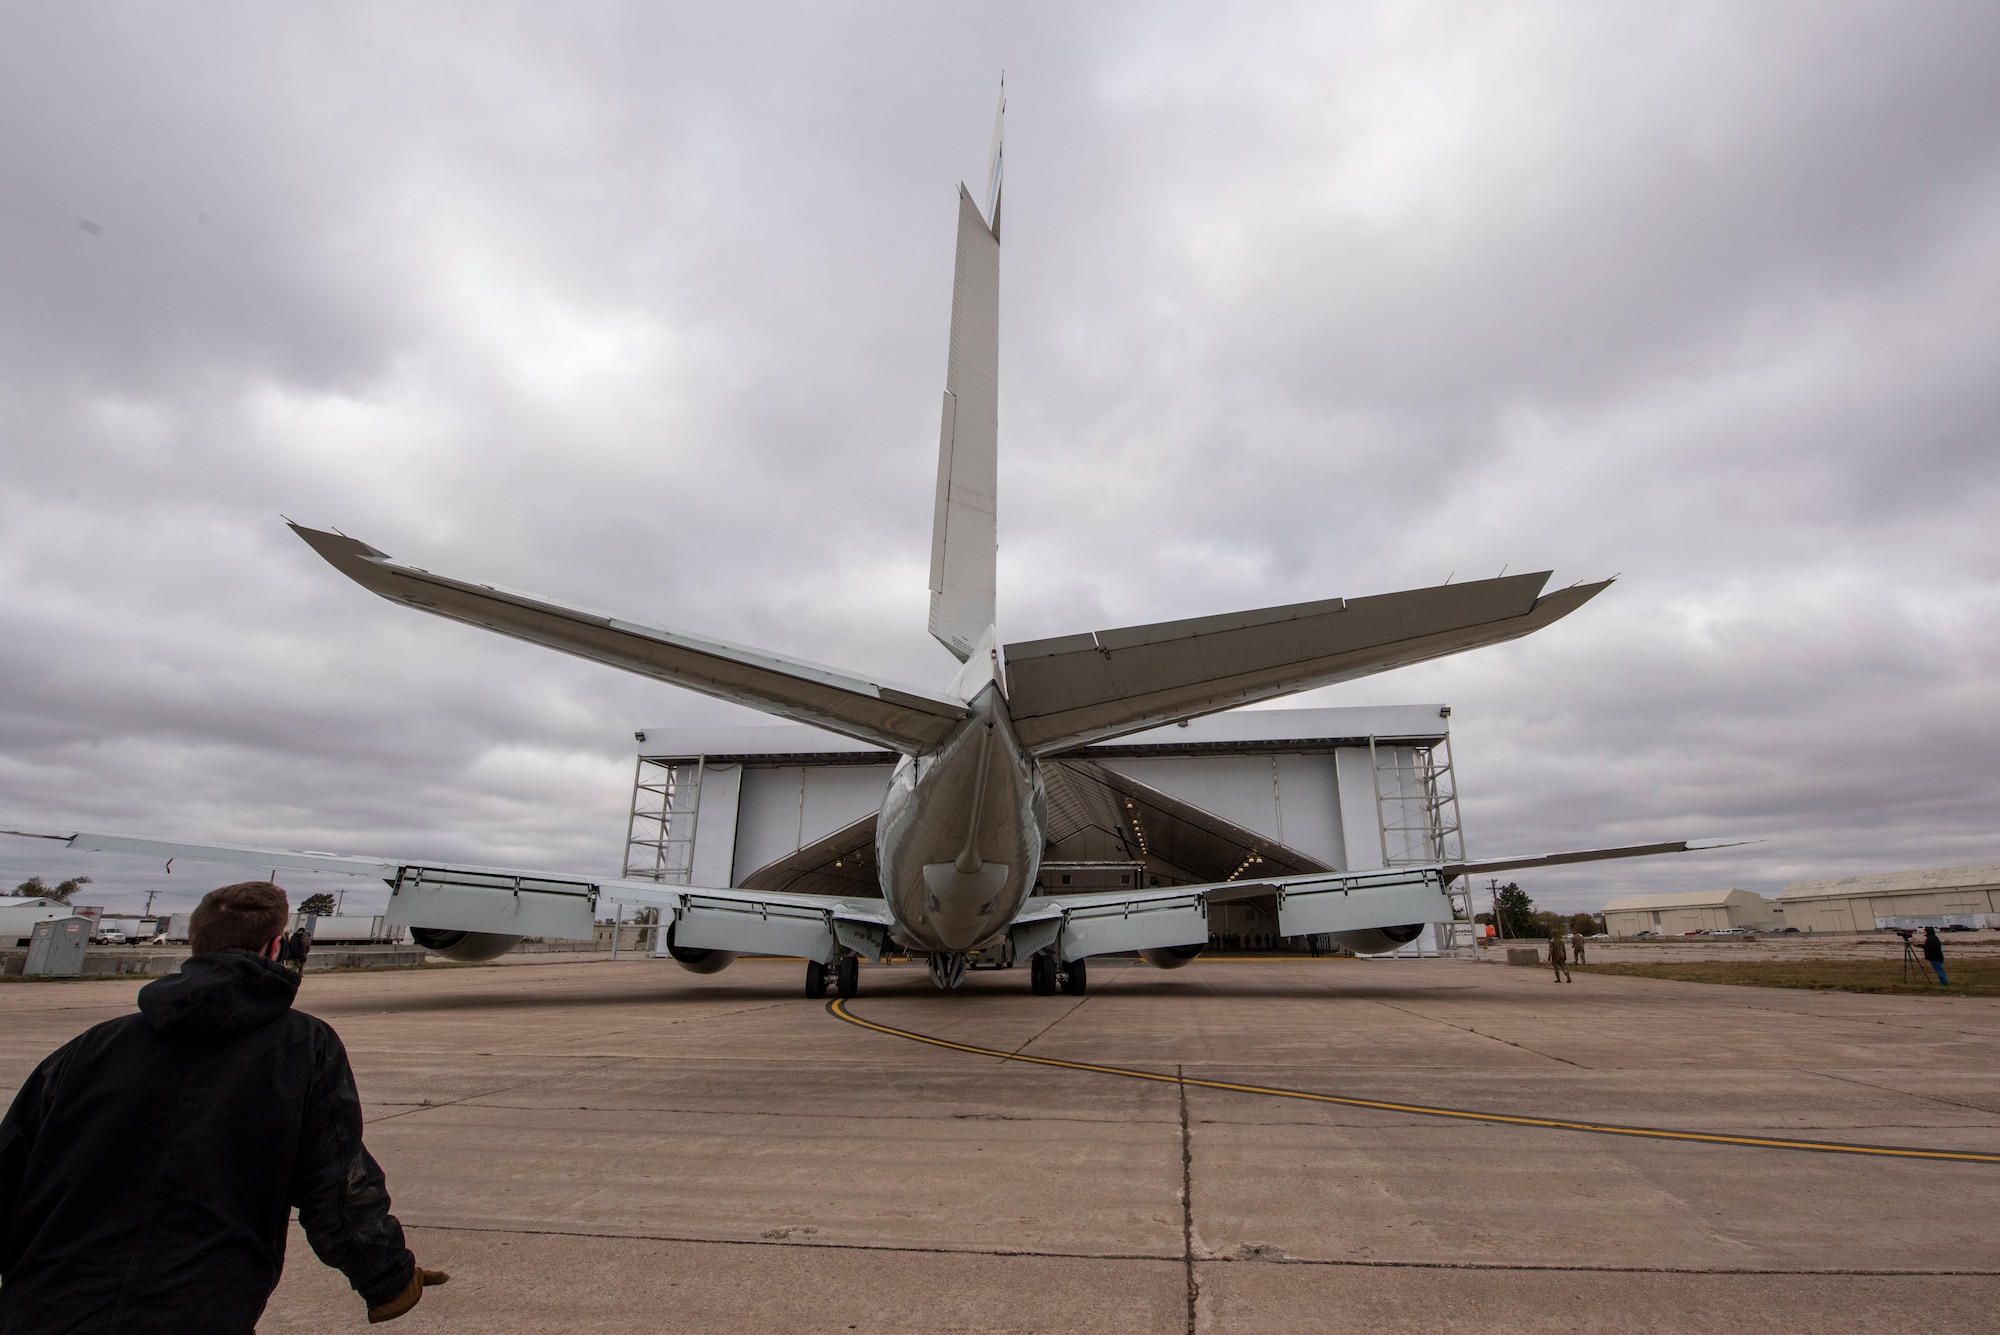 An Airman watches the tail of an aircraft as it is towed into a newly constructed hangar at Lincoln Airport during a proof of concept exercise Oct. 23, 2020.